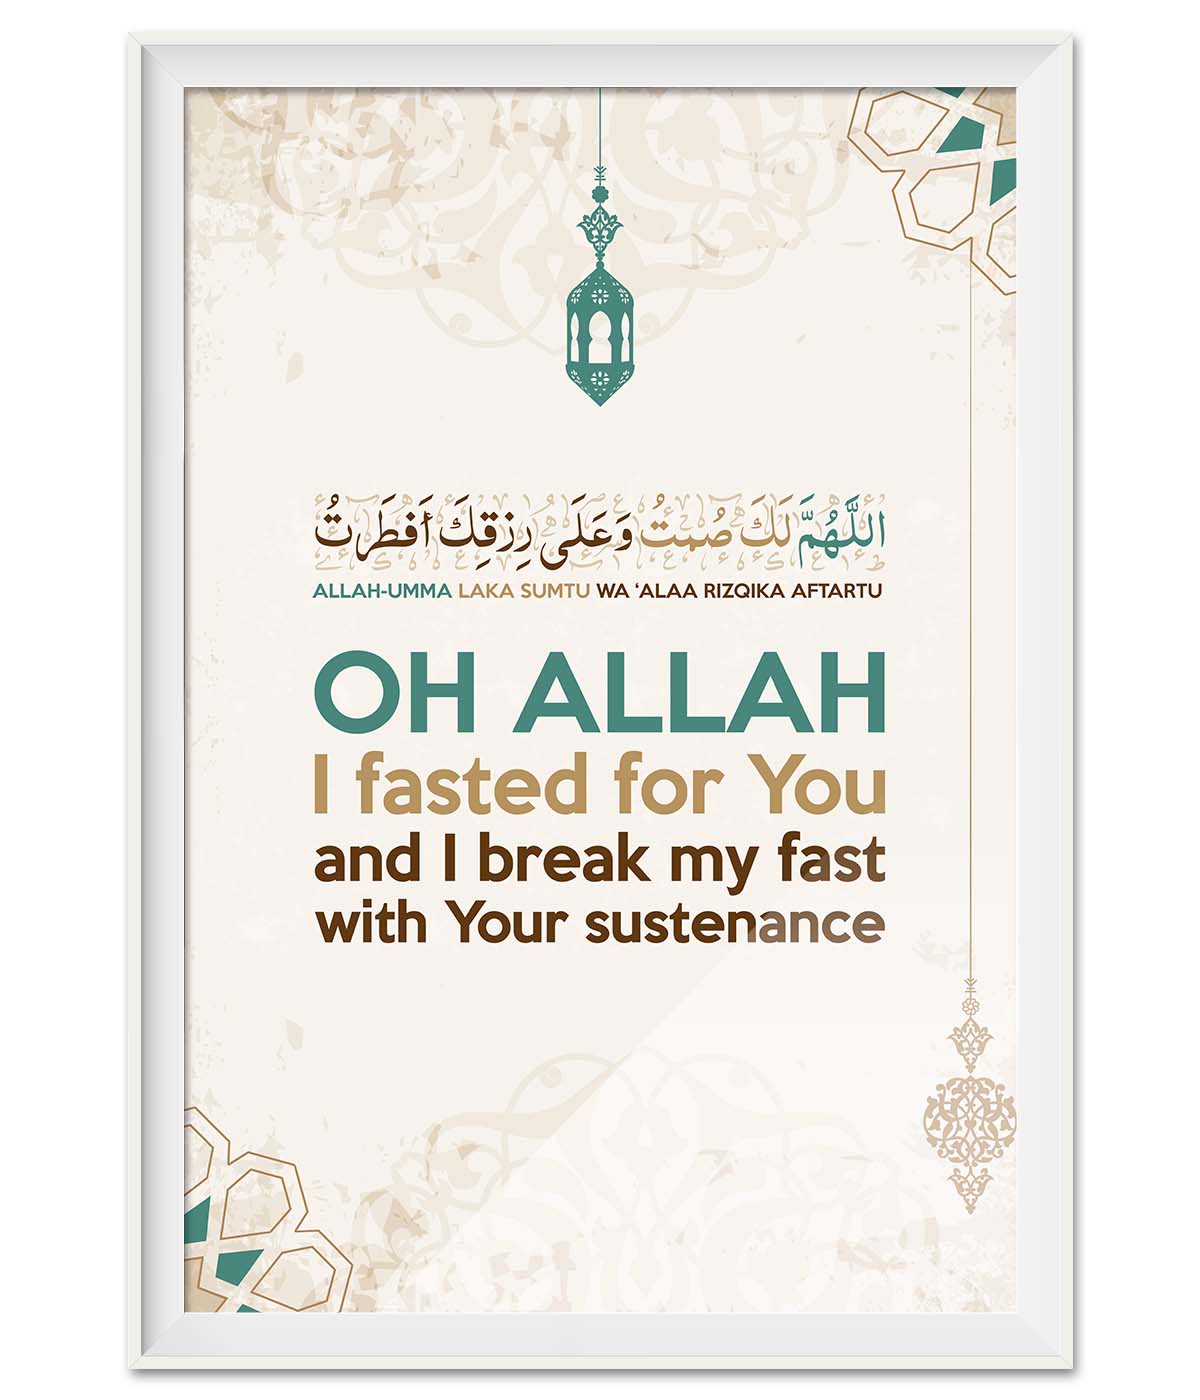 Papyrus Paper Prayer on Breaking The Fast (print)